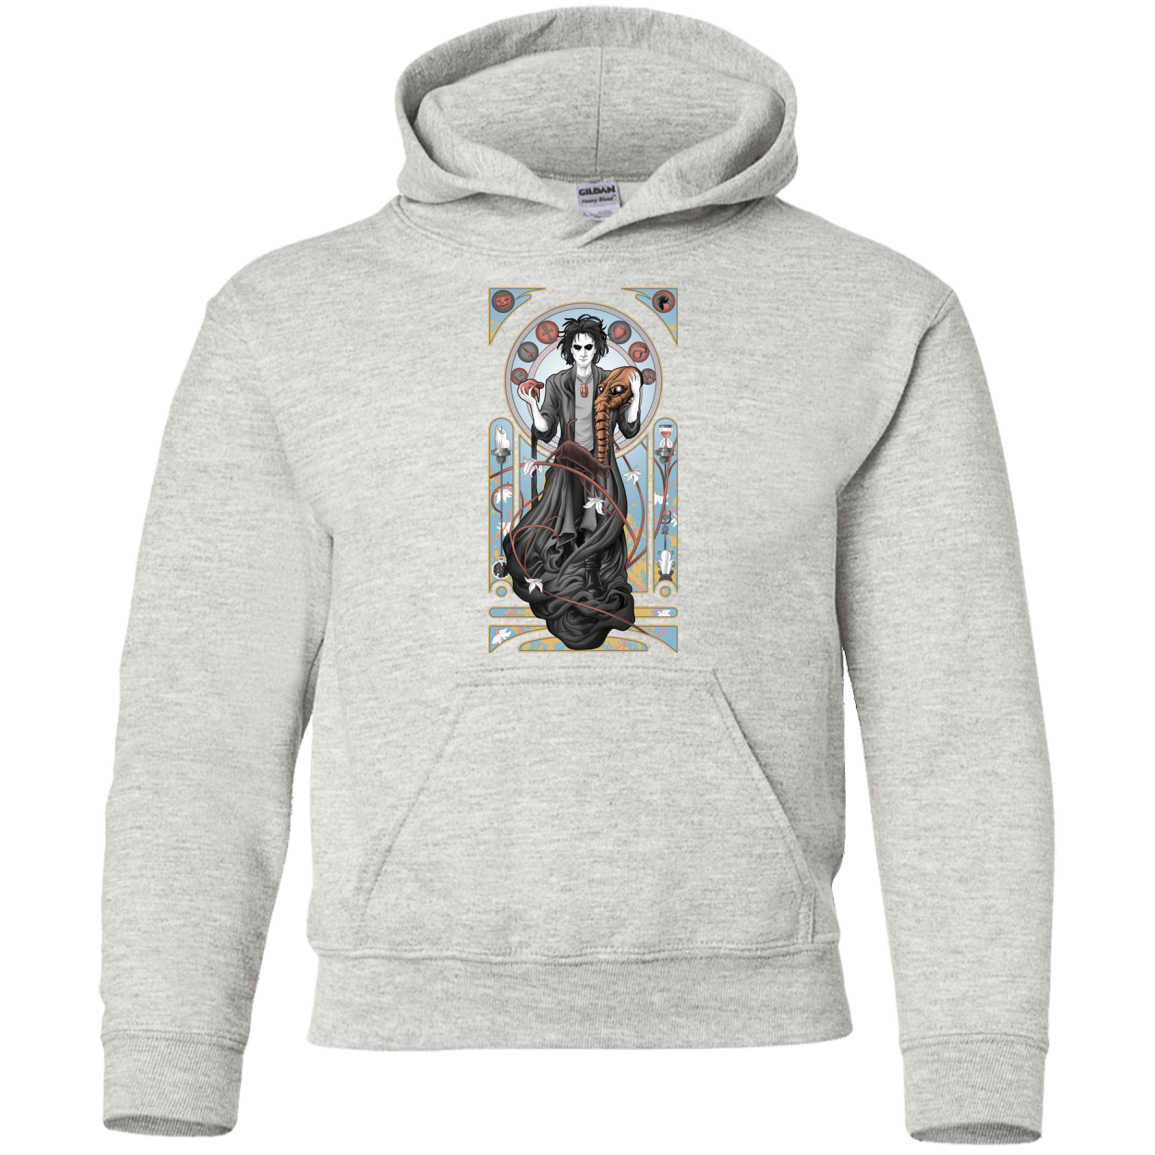 An Endless Dream Youth Hoodie